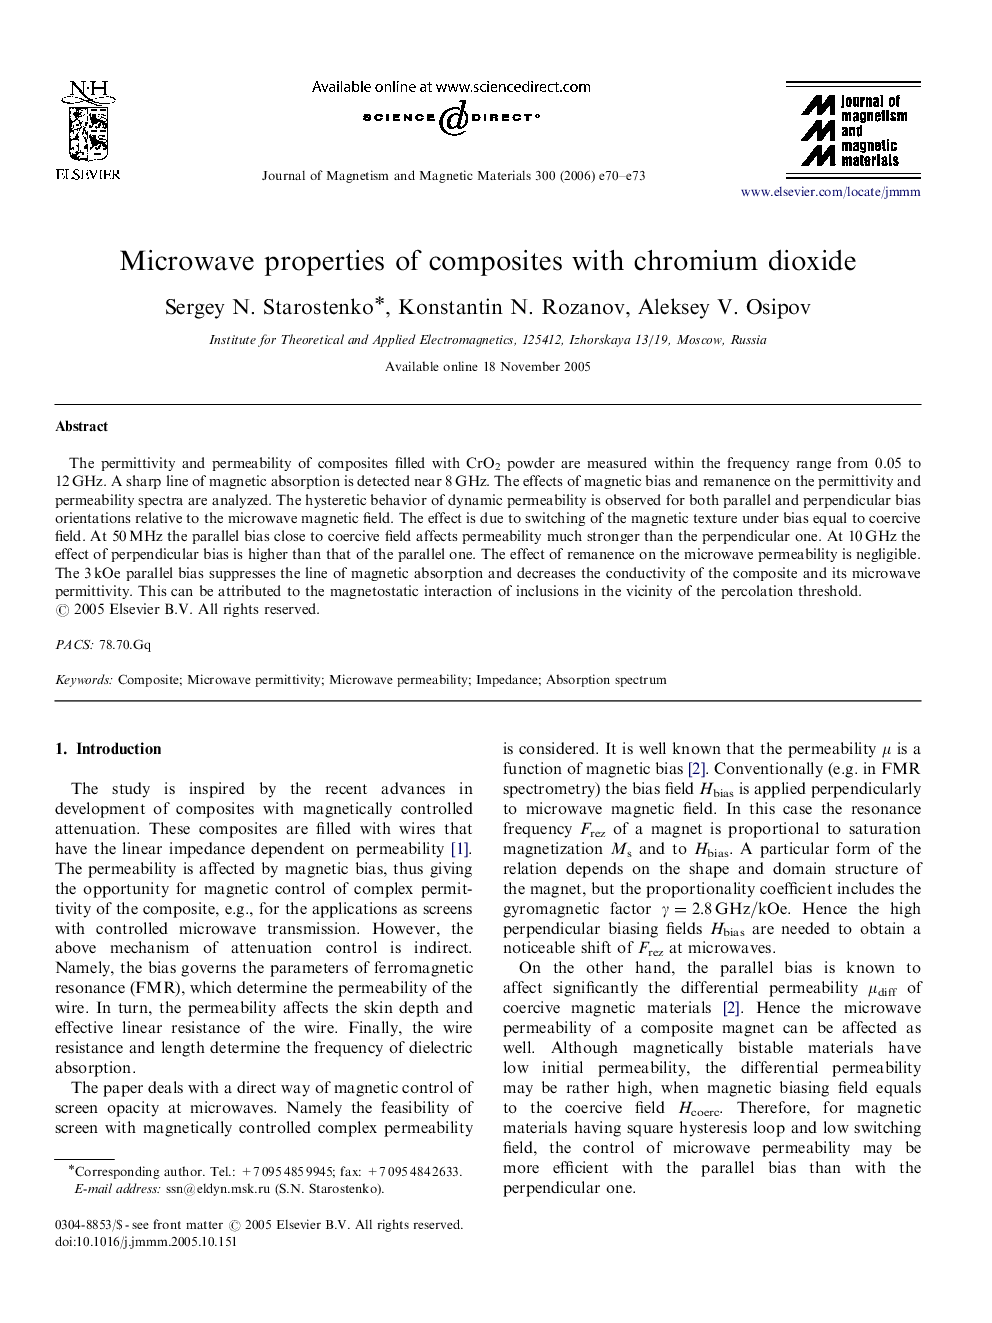 Microwave properties of composites with chromium dioxide